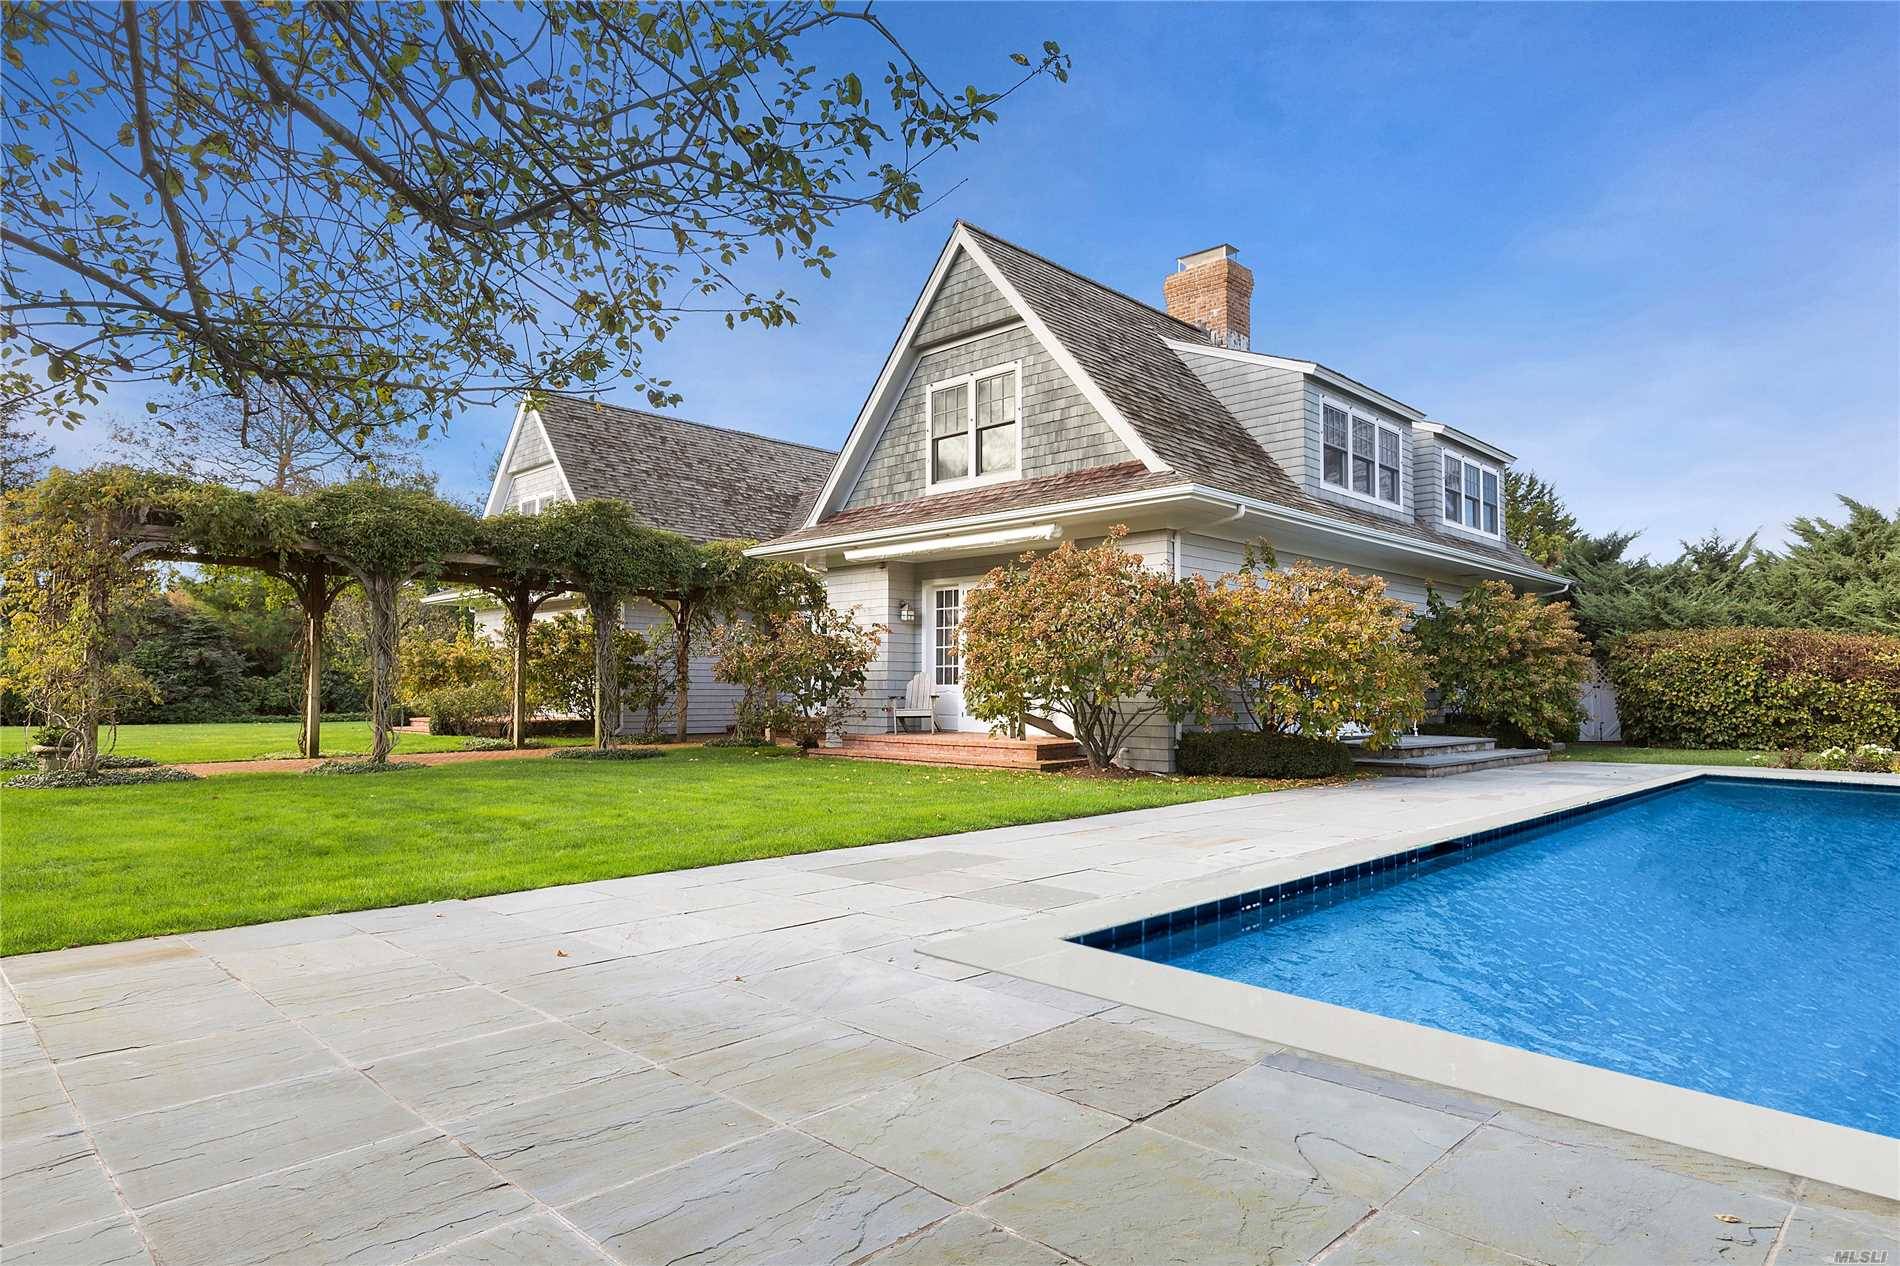 This Five Bedroom, Five And One Half Bath, Sagaponack Traditional Is Nestled On A Lush Acre, Surrounded By Mature Hedges, Hydrangeas, And Stunning Rhododendrons.